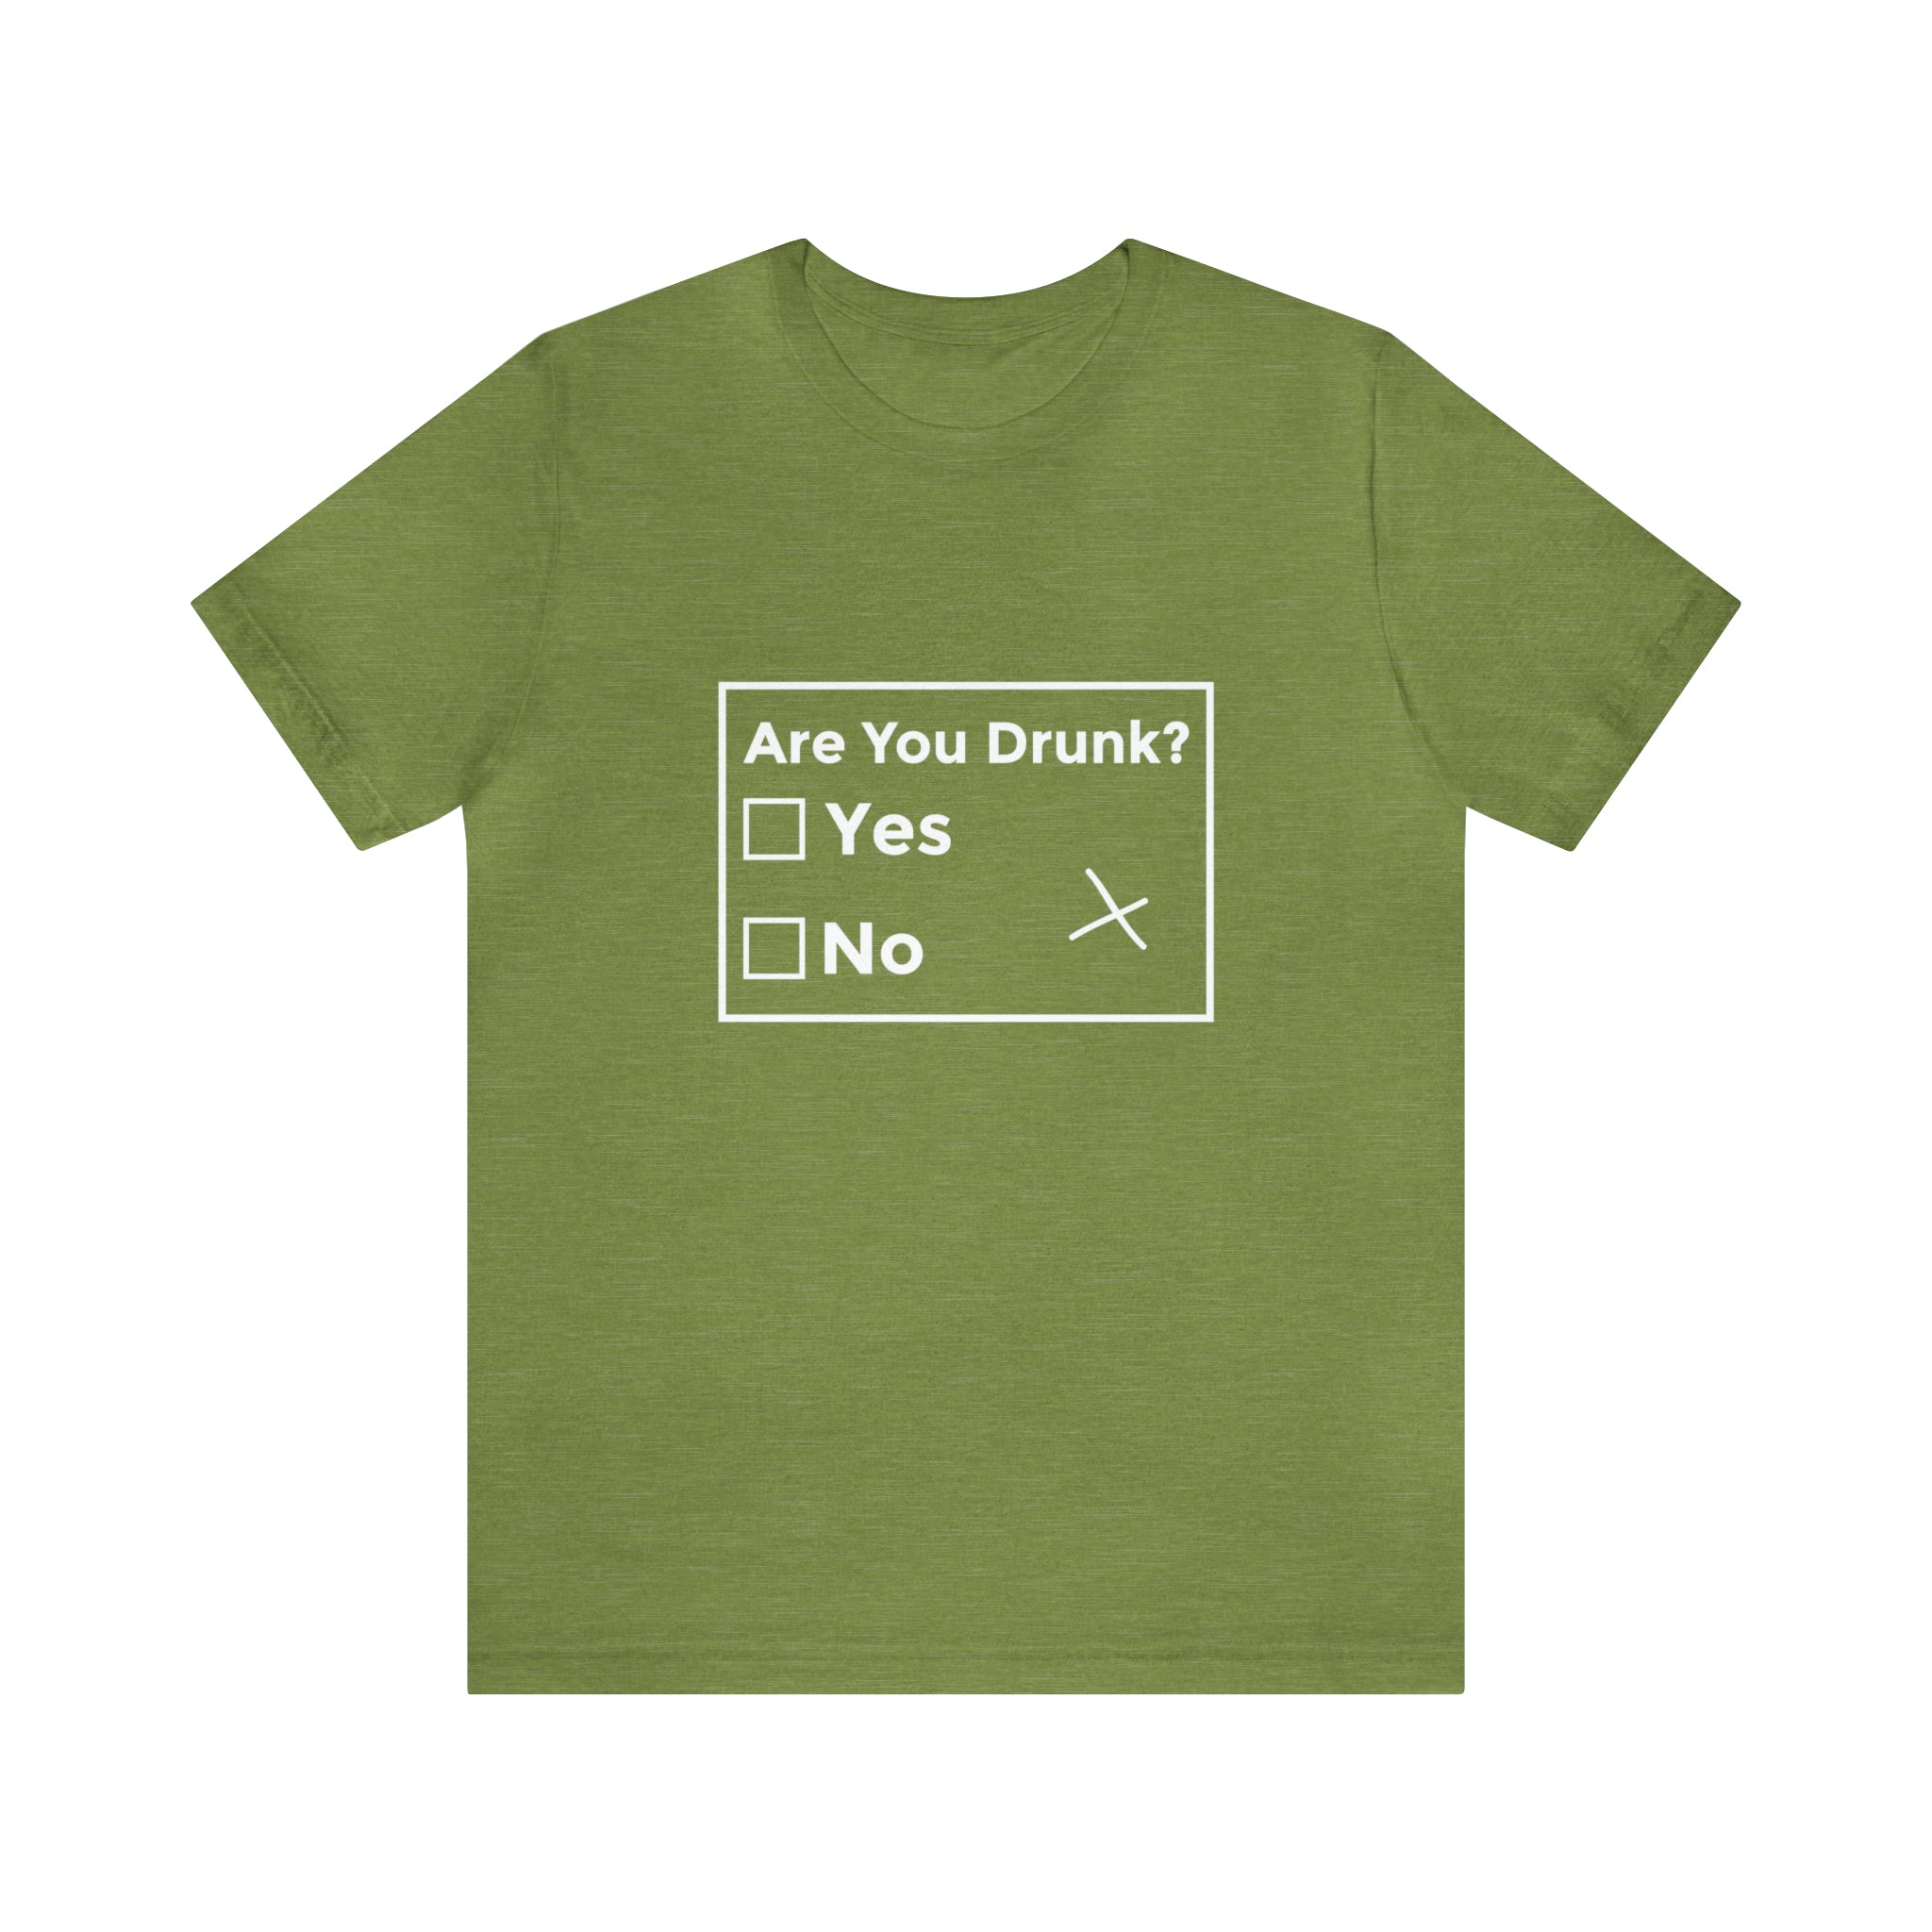 Are You Drunk? T-shirt with white text.